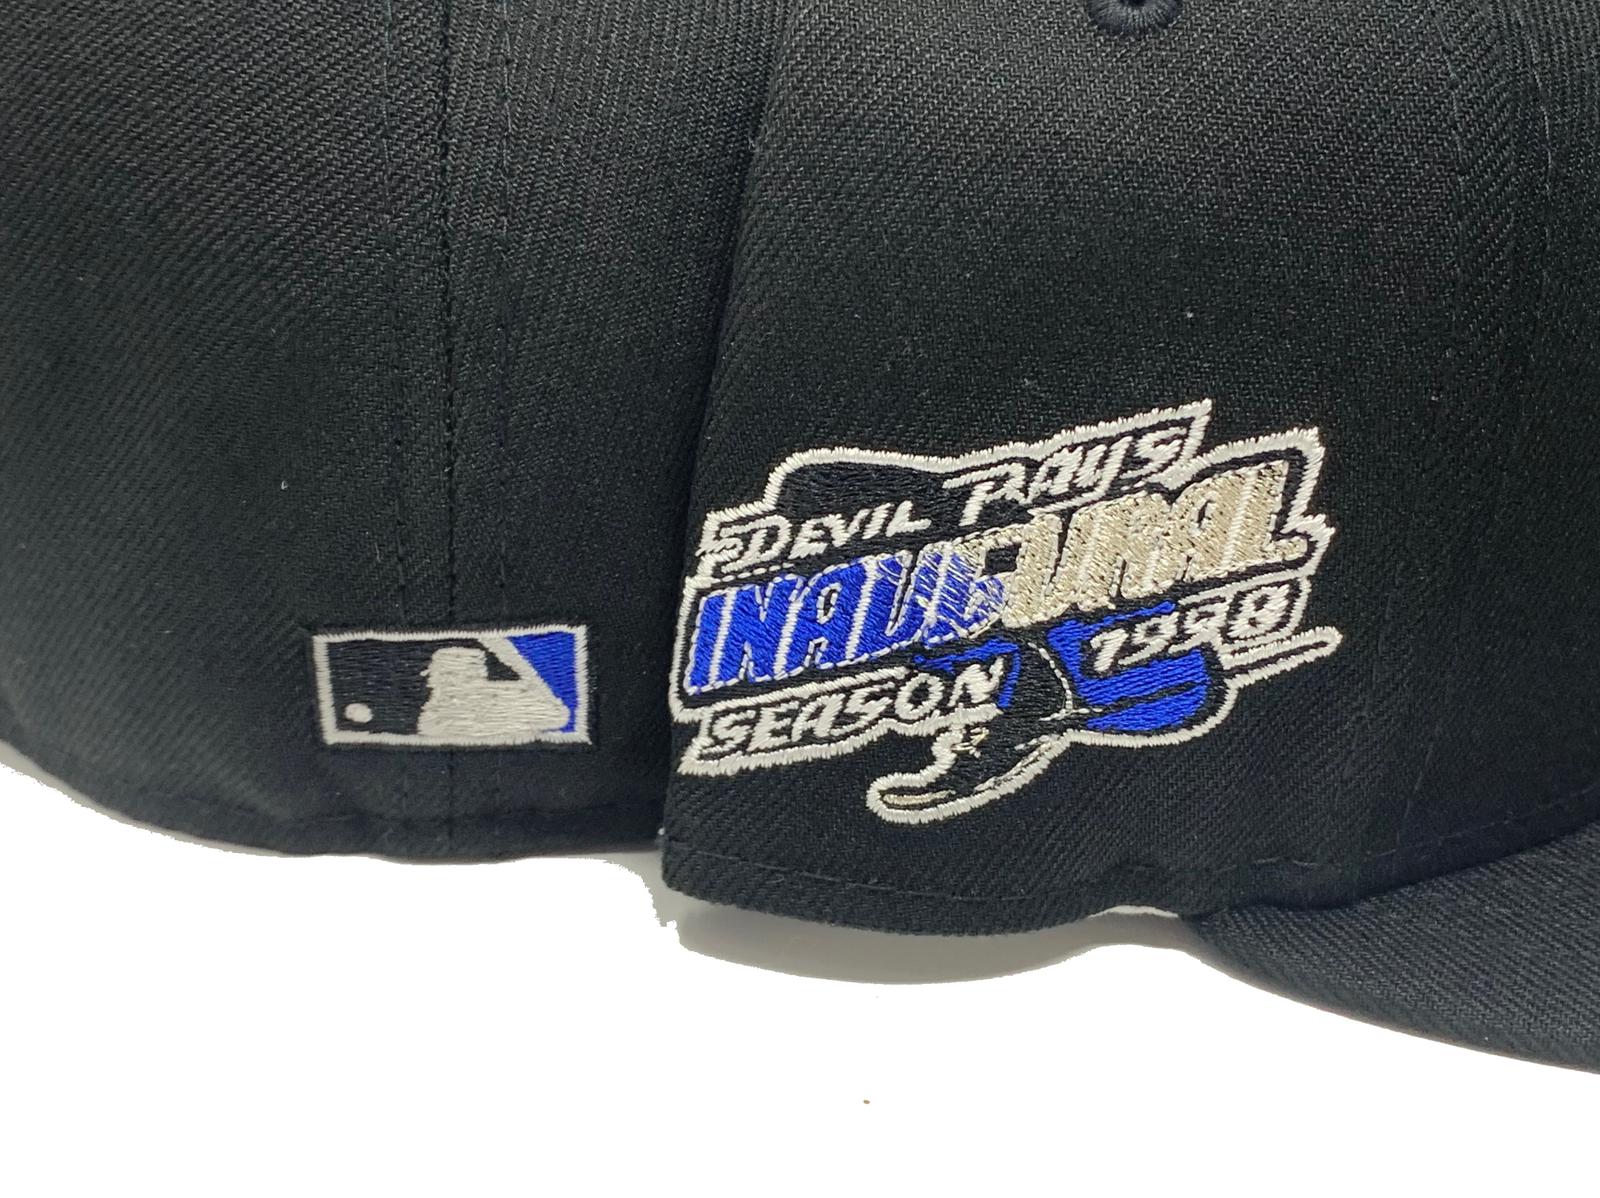 New Era Tampa Bay Rays Black Inaugural Season 1998 Black Throwback Edition  59Fifty Fitted Hat, EXCLUSIVE HATS, CAPS